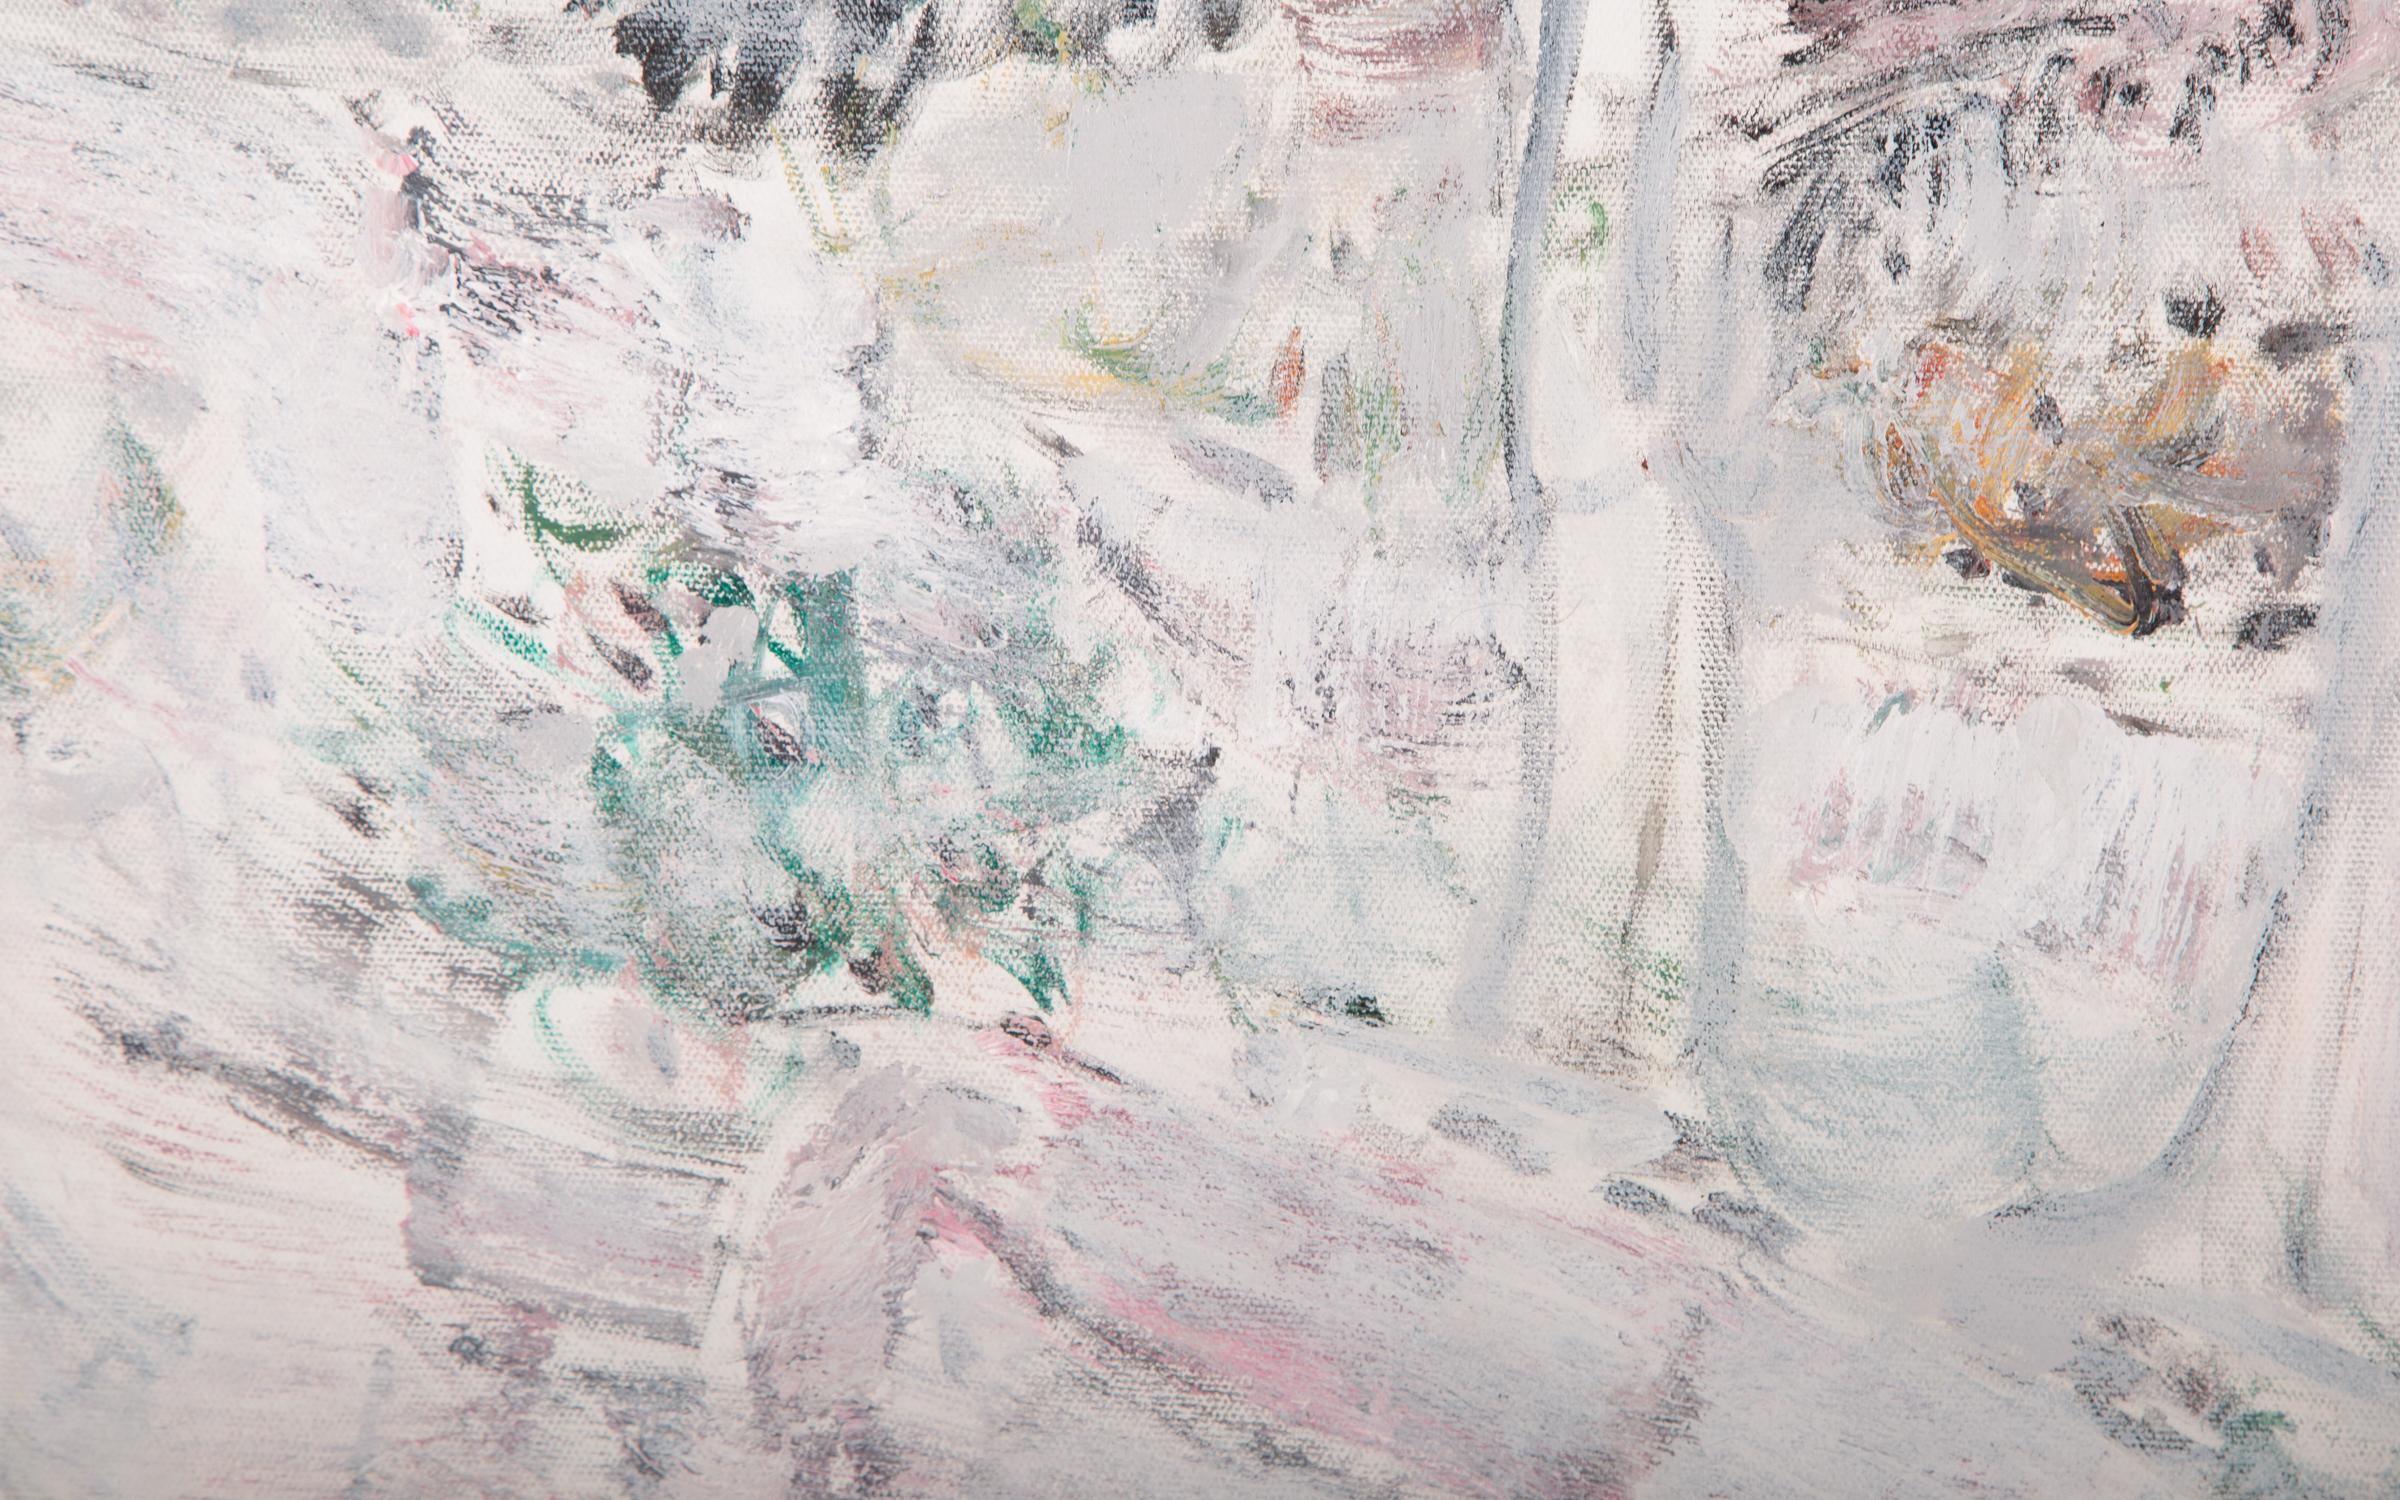 White Forest - Abstract Expressionist Painting by Mingguang Yu